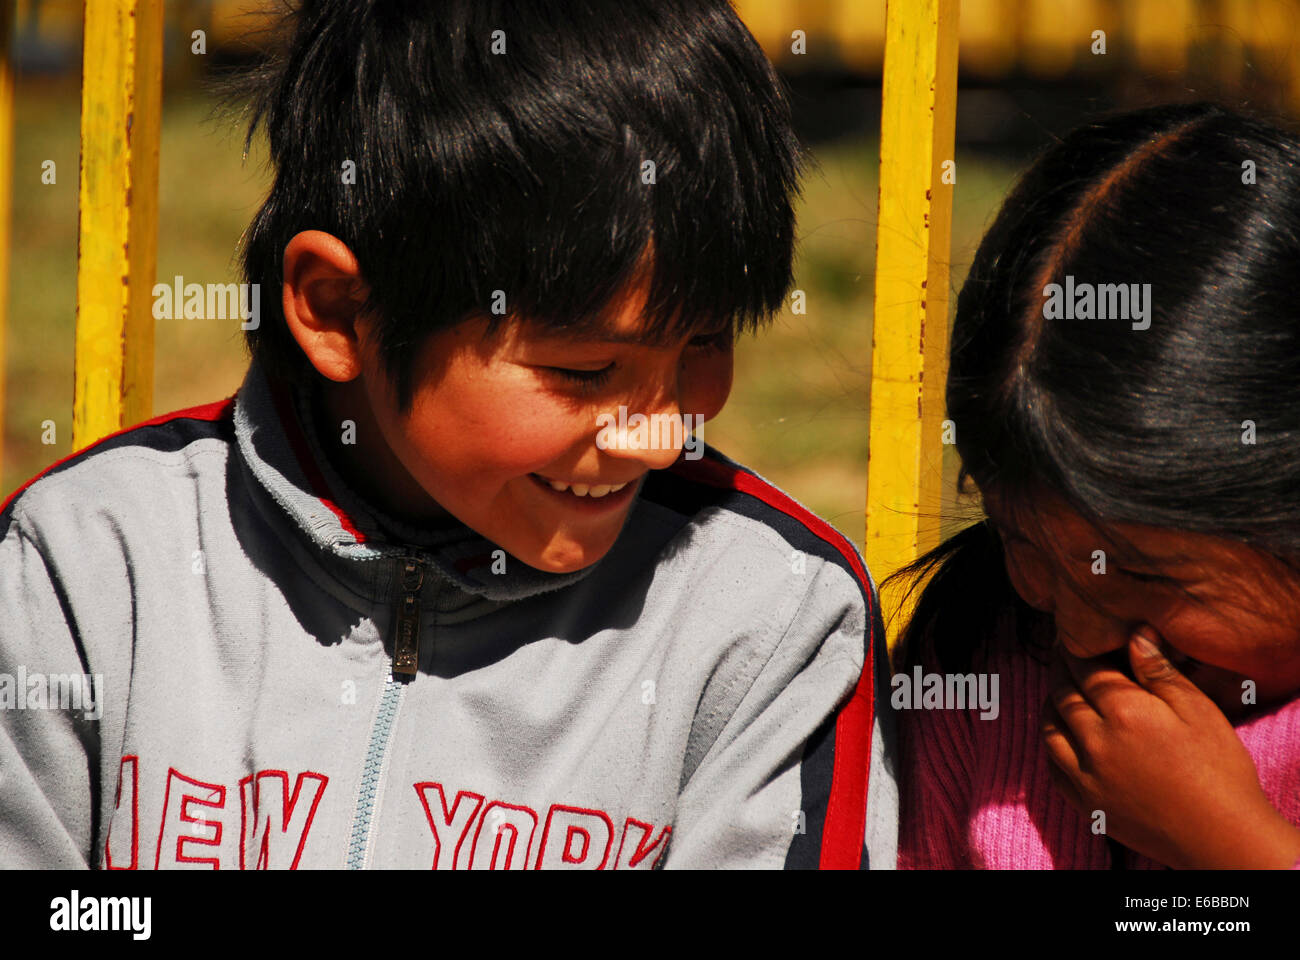 Bolivia, El alto, close-up of a small boy and girl sitting by pole, looking at each other and smiling. Stock Photo